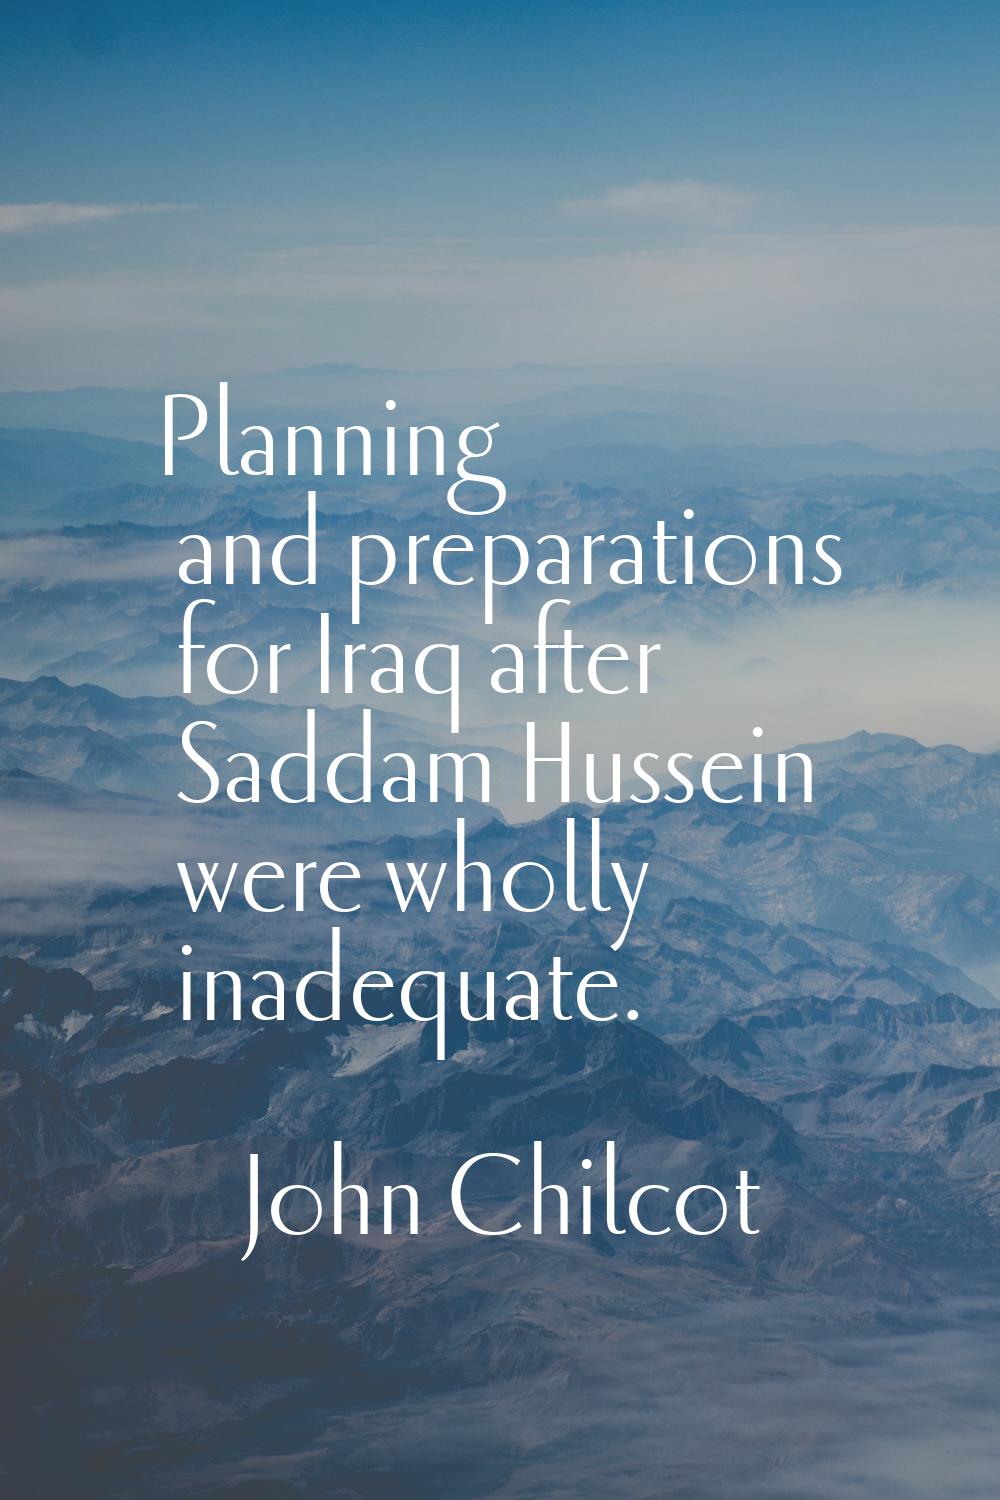 Planning and preparations for Iraq after Saddam Hussein were wholly inadequate.